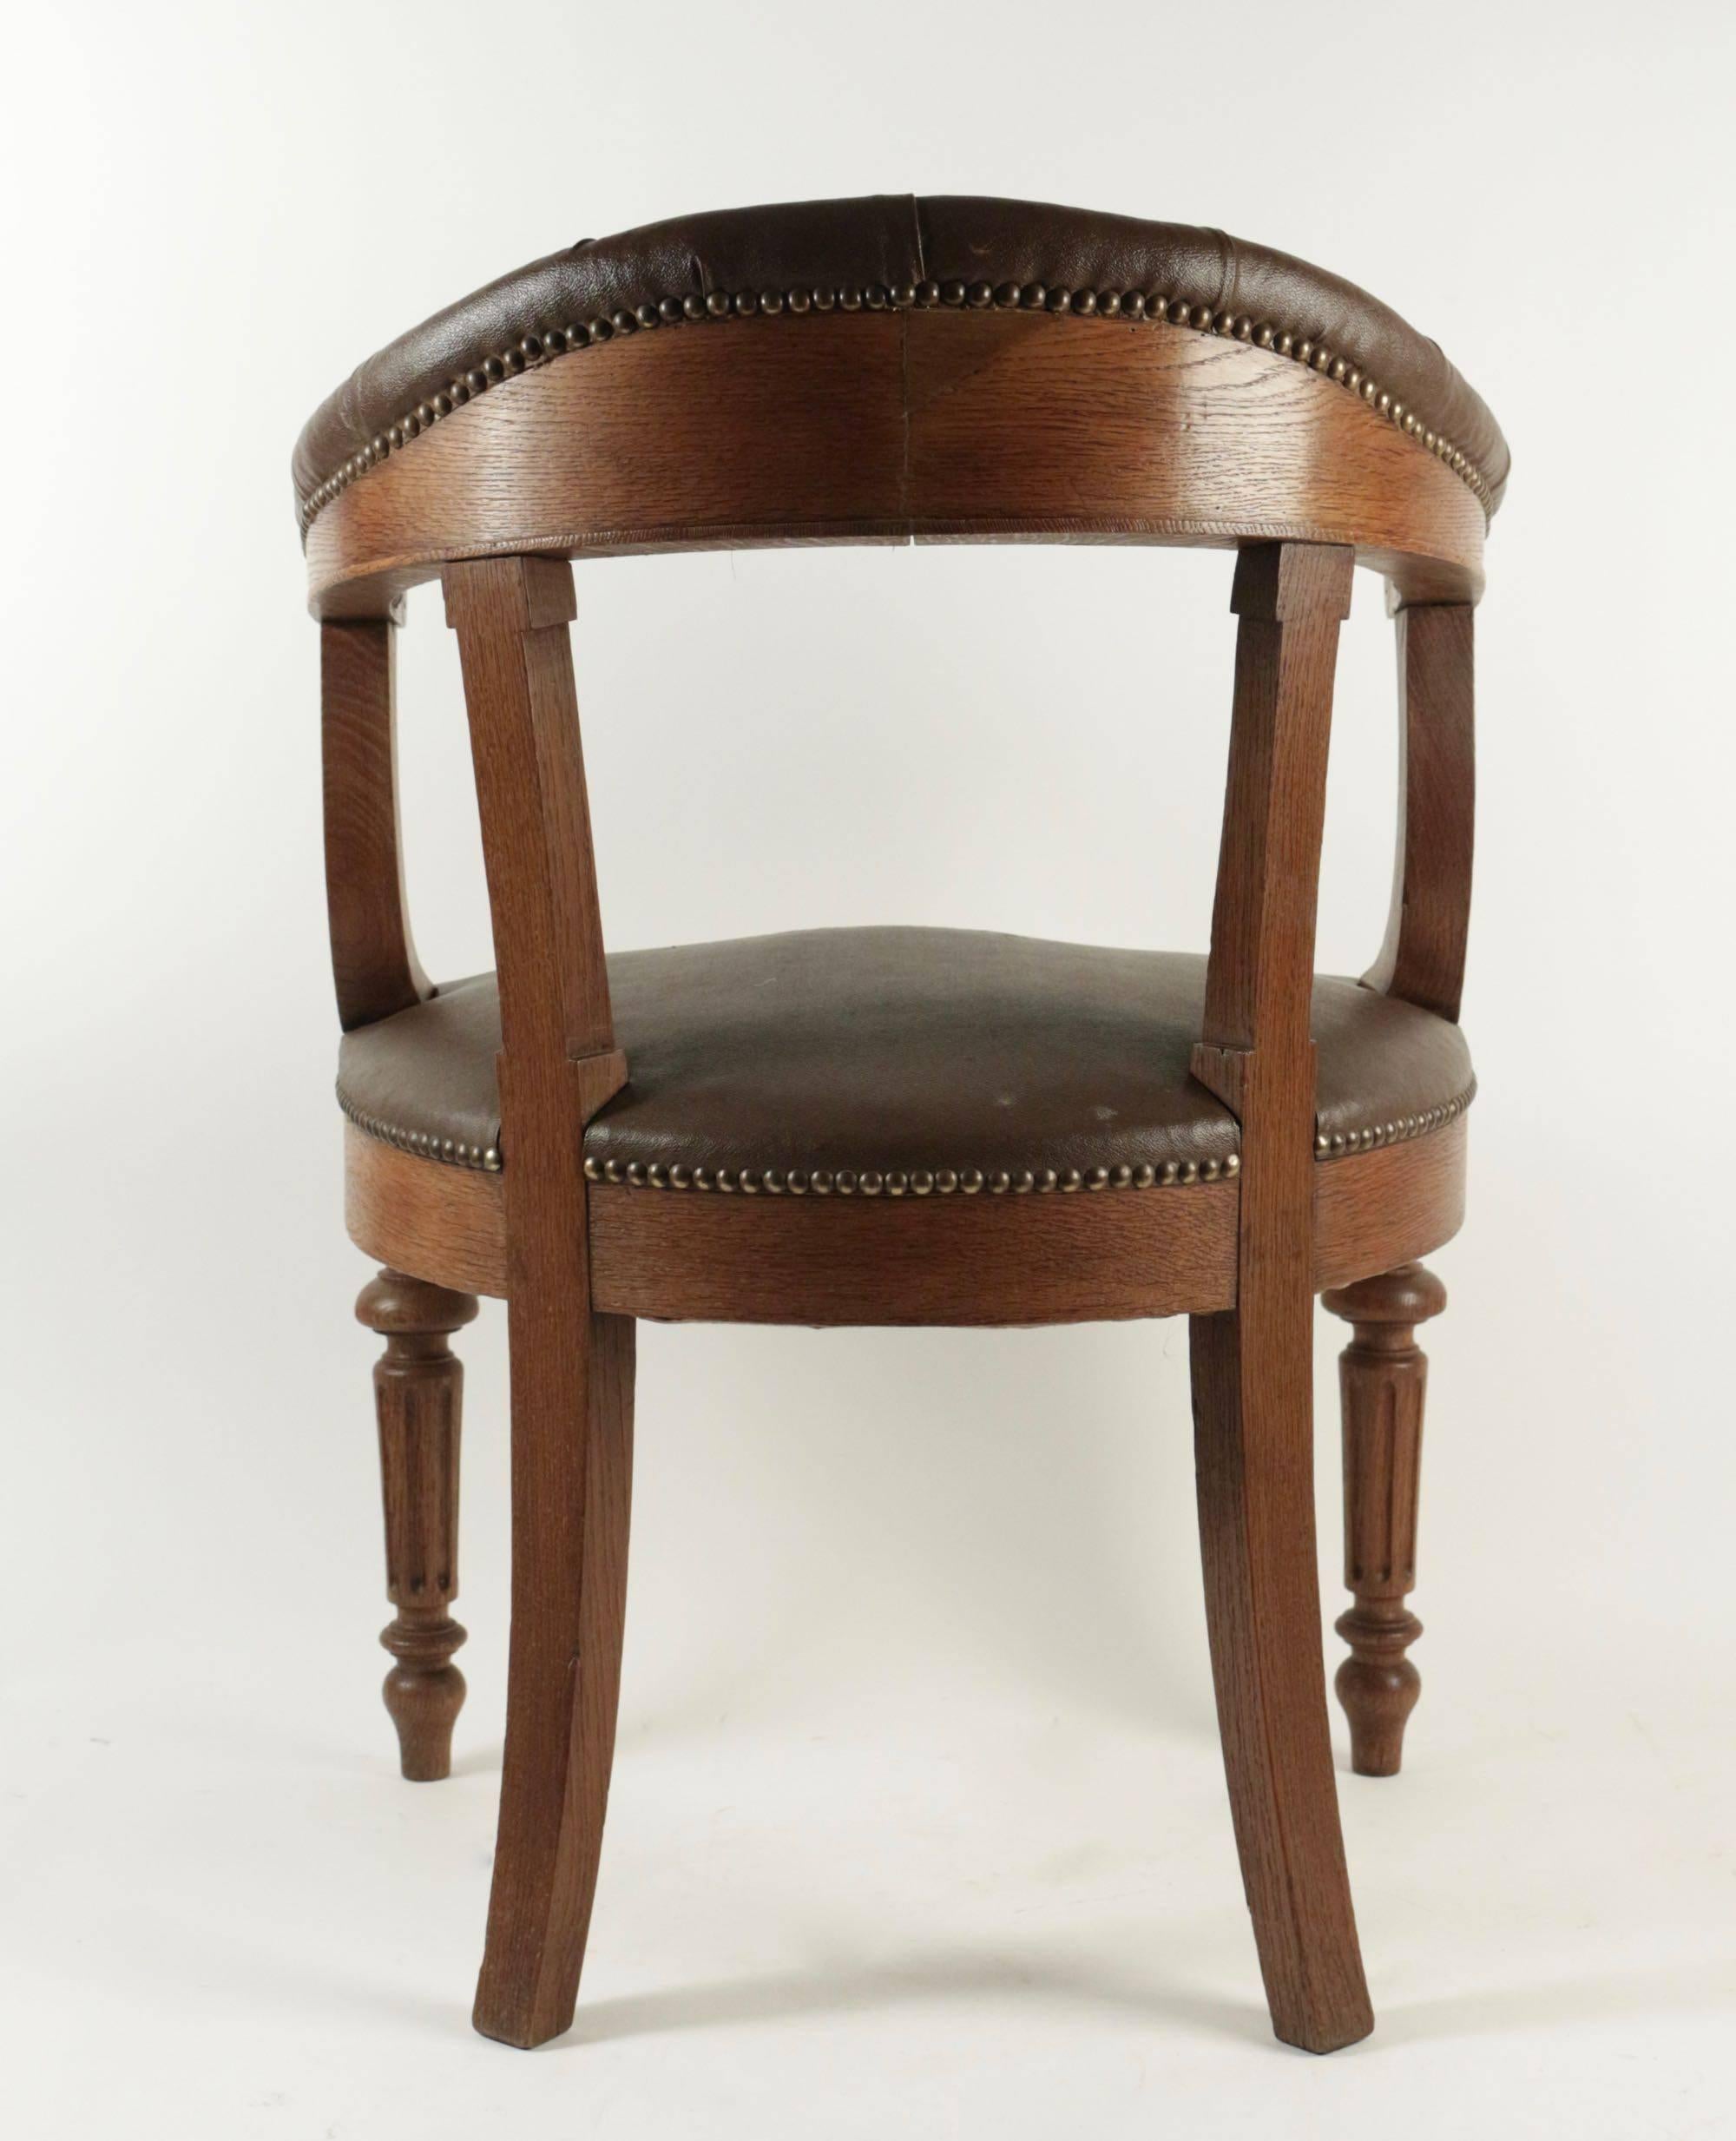 Late 19th Century Office Chair from the Napoleon III Era in Fabric In The Imitation Of The Leather